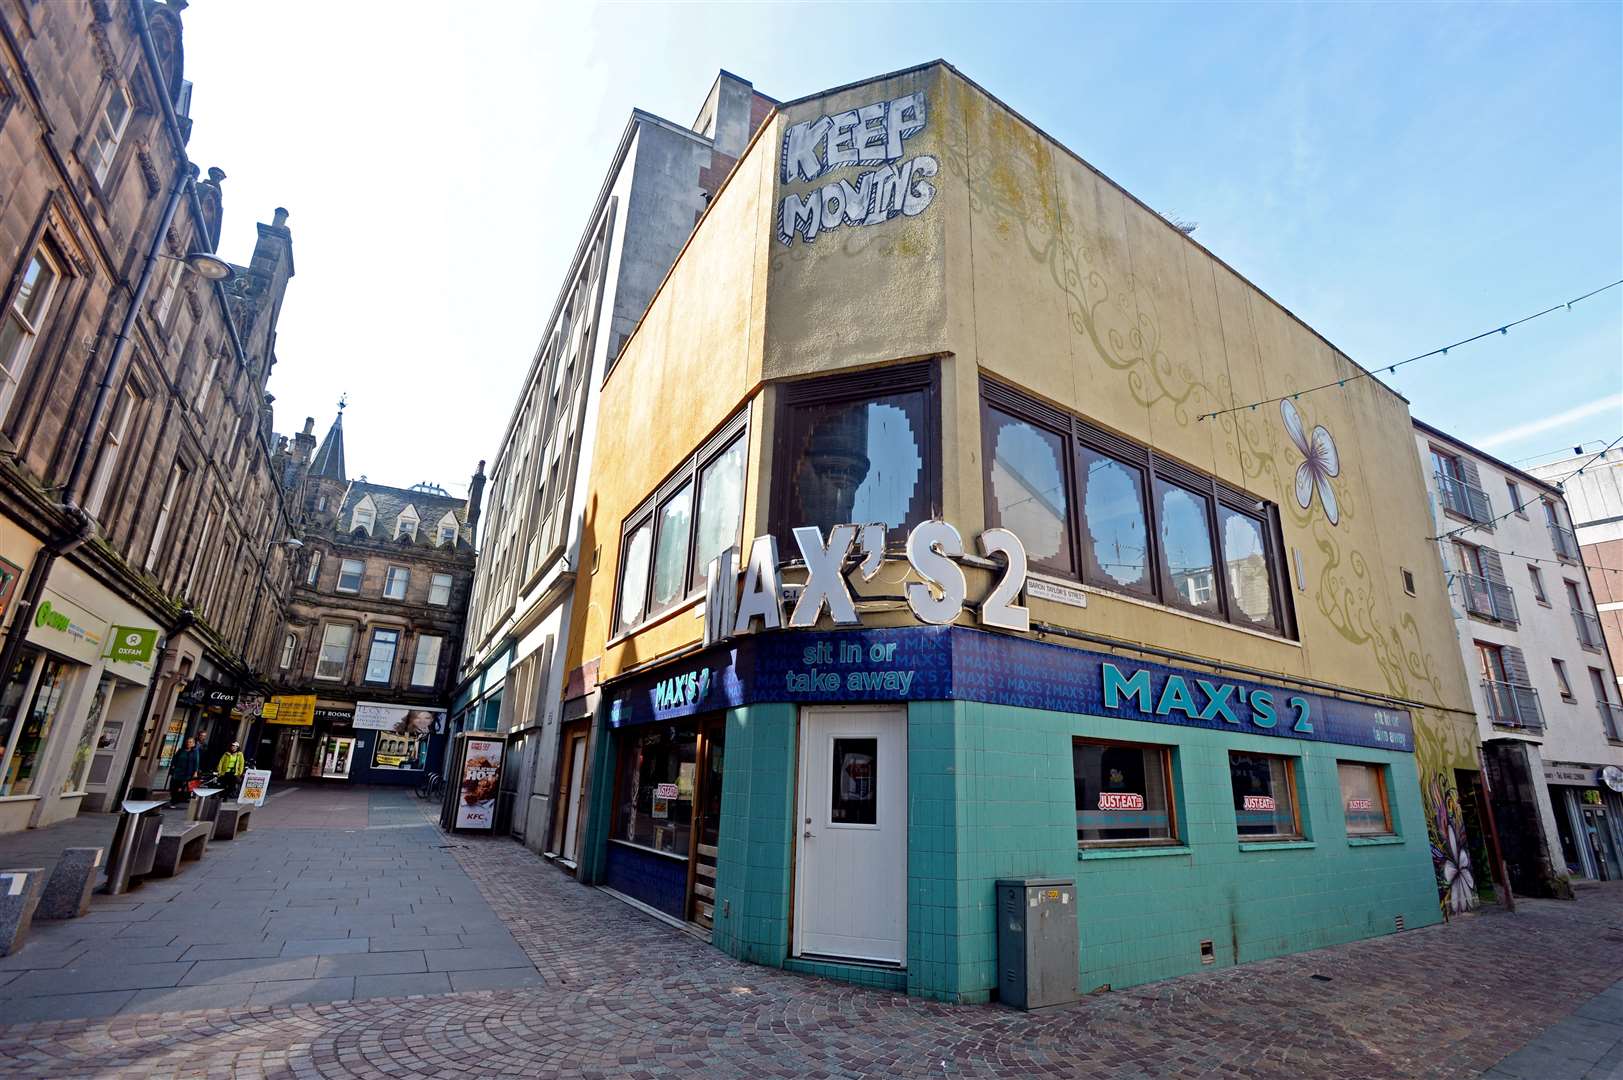 Four new flats are set to be developed above Max's 2 on Baron Taylor's street, Inverness.